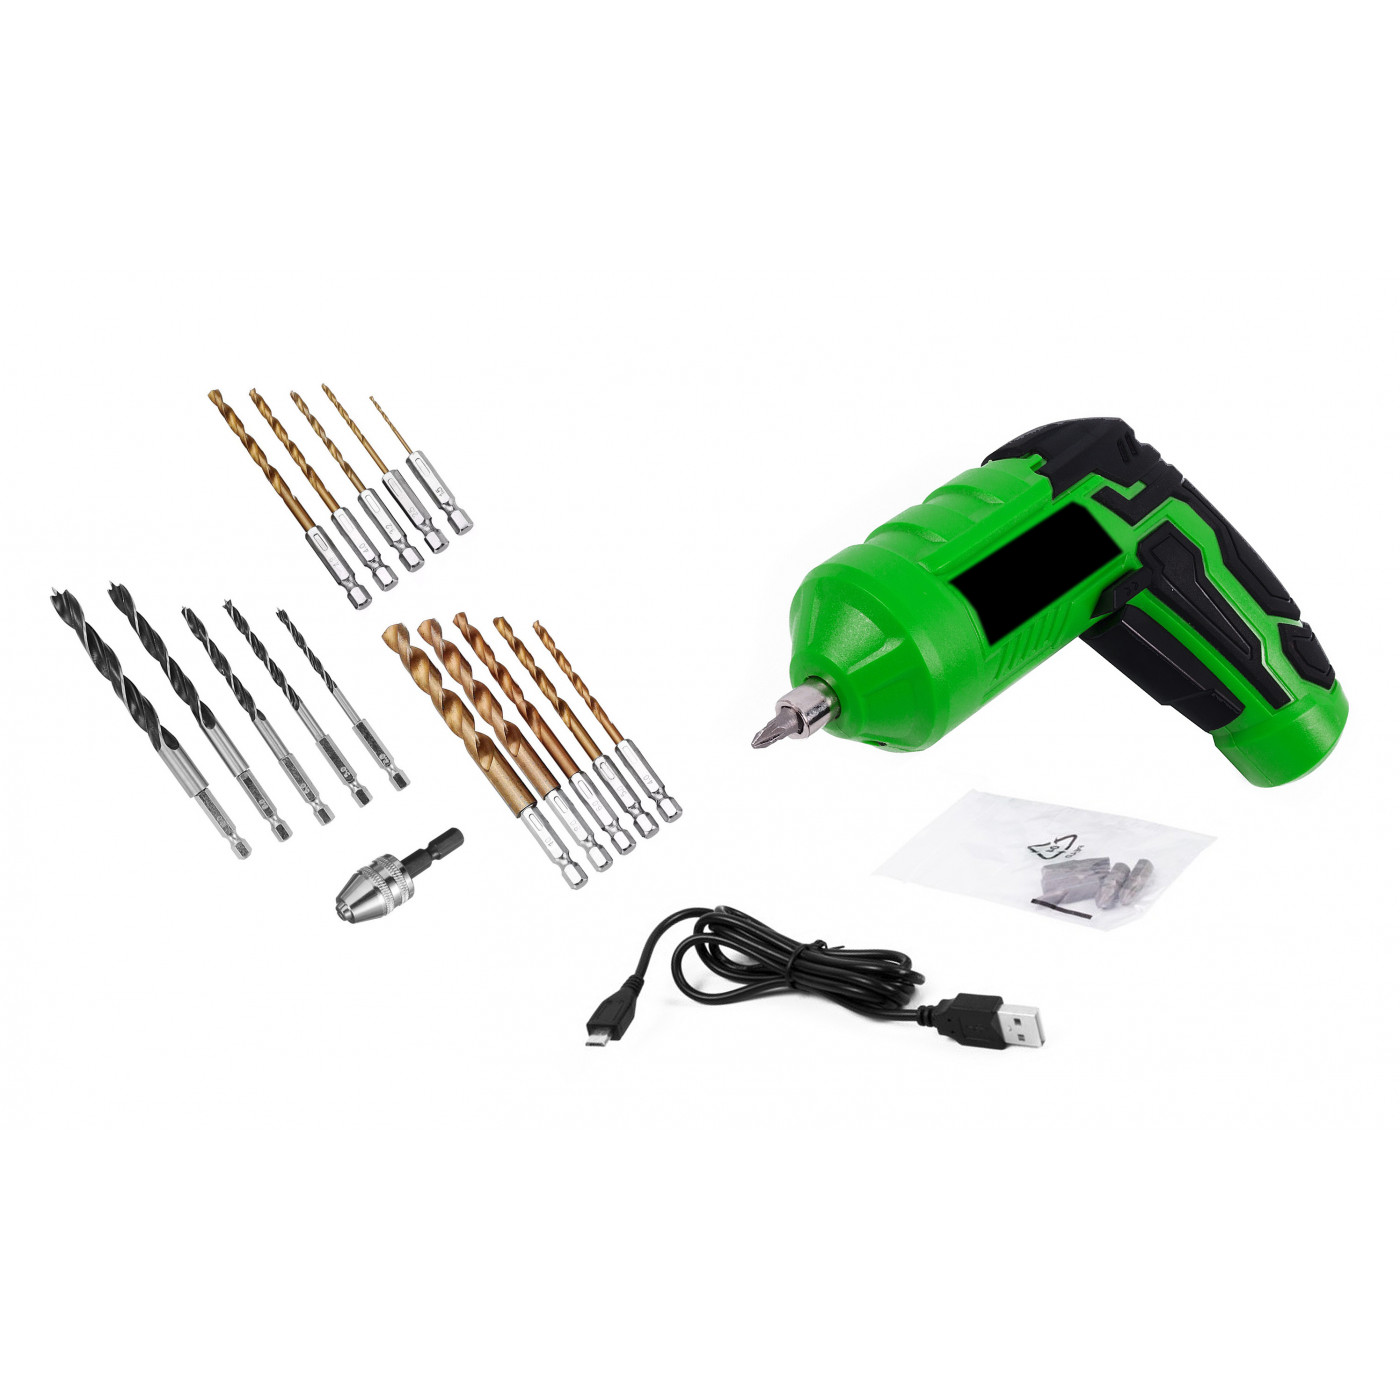 Set of electric screwdriver & drill with accessories